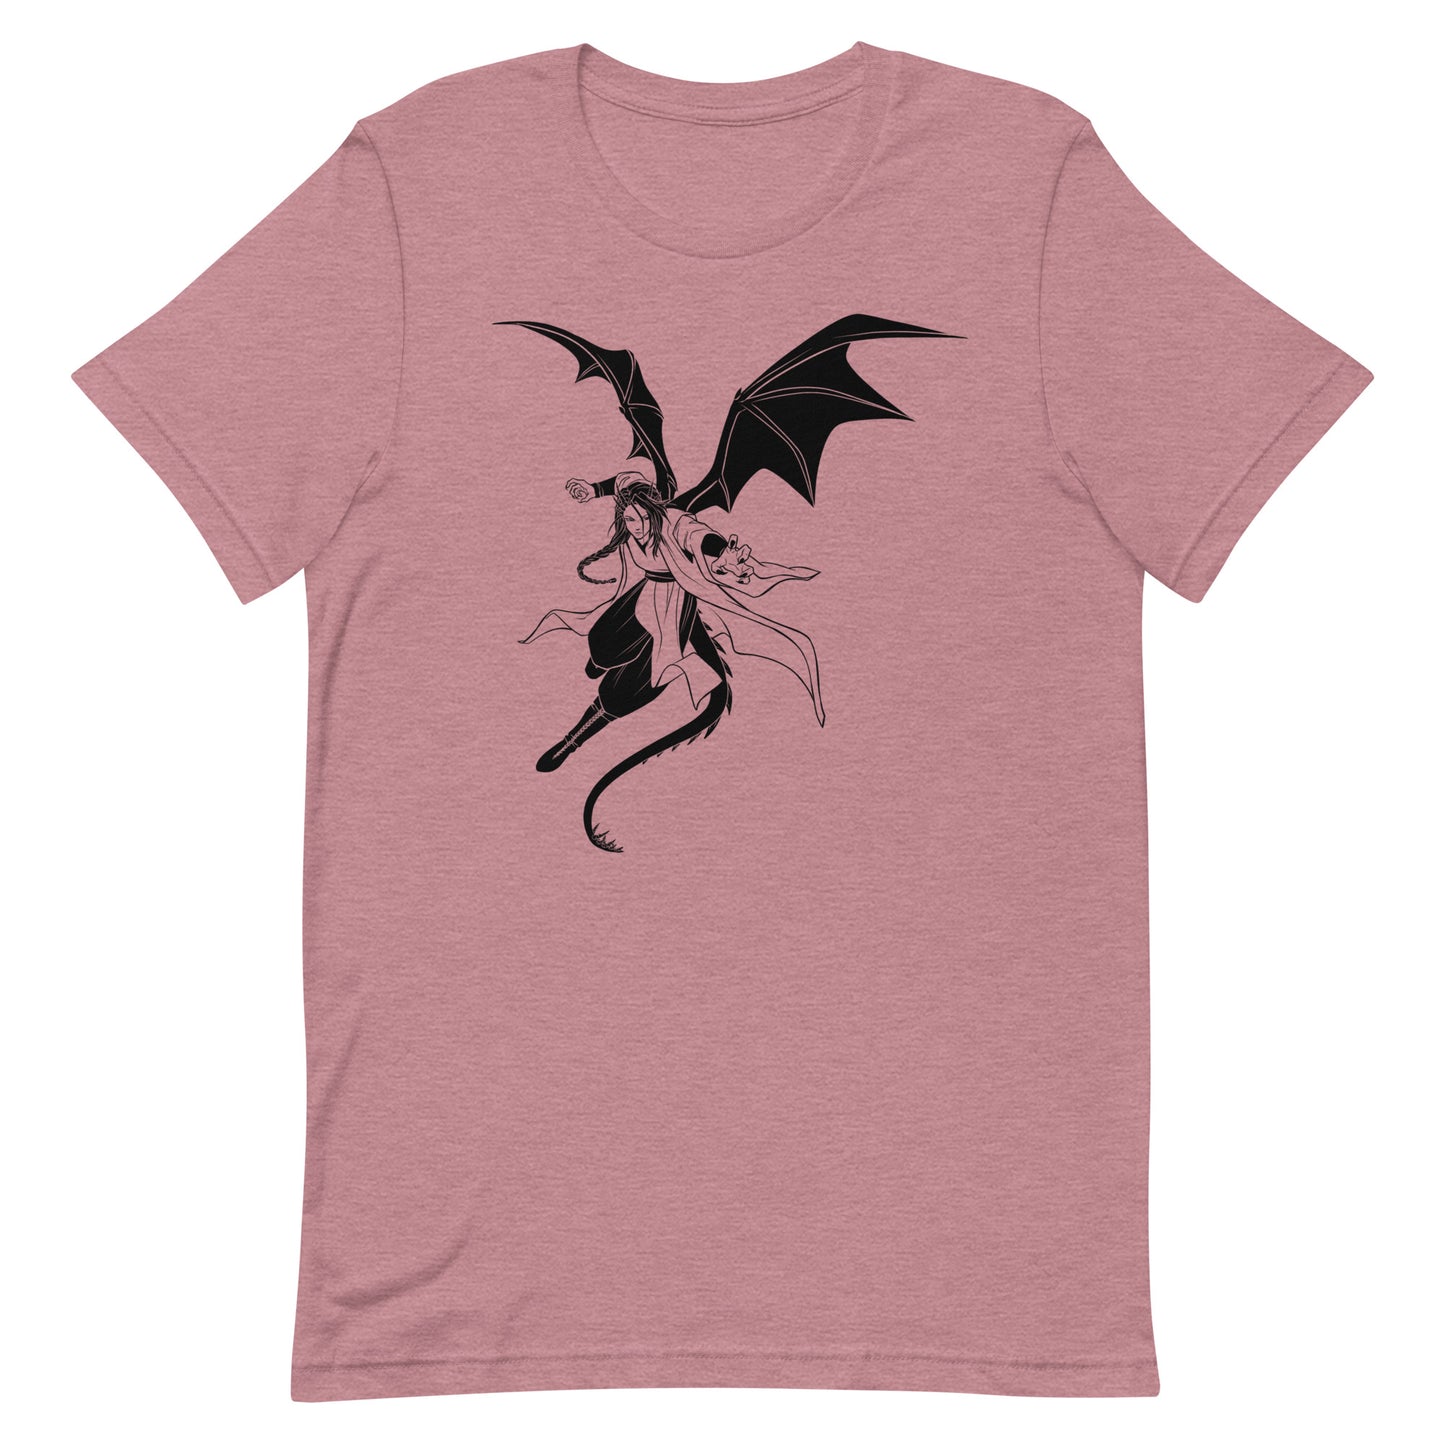 "Lord of Dragons" Unisex T-shirt (The Guild Codex)